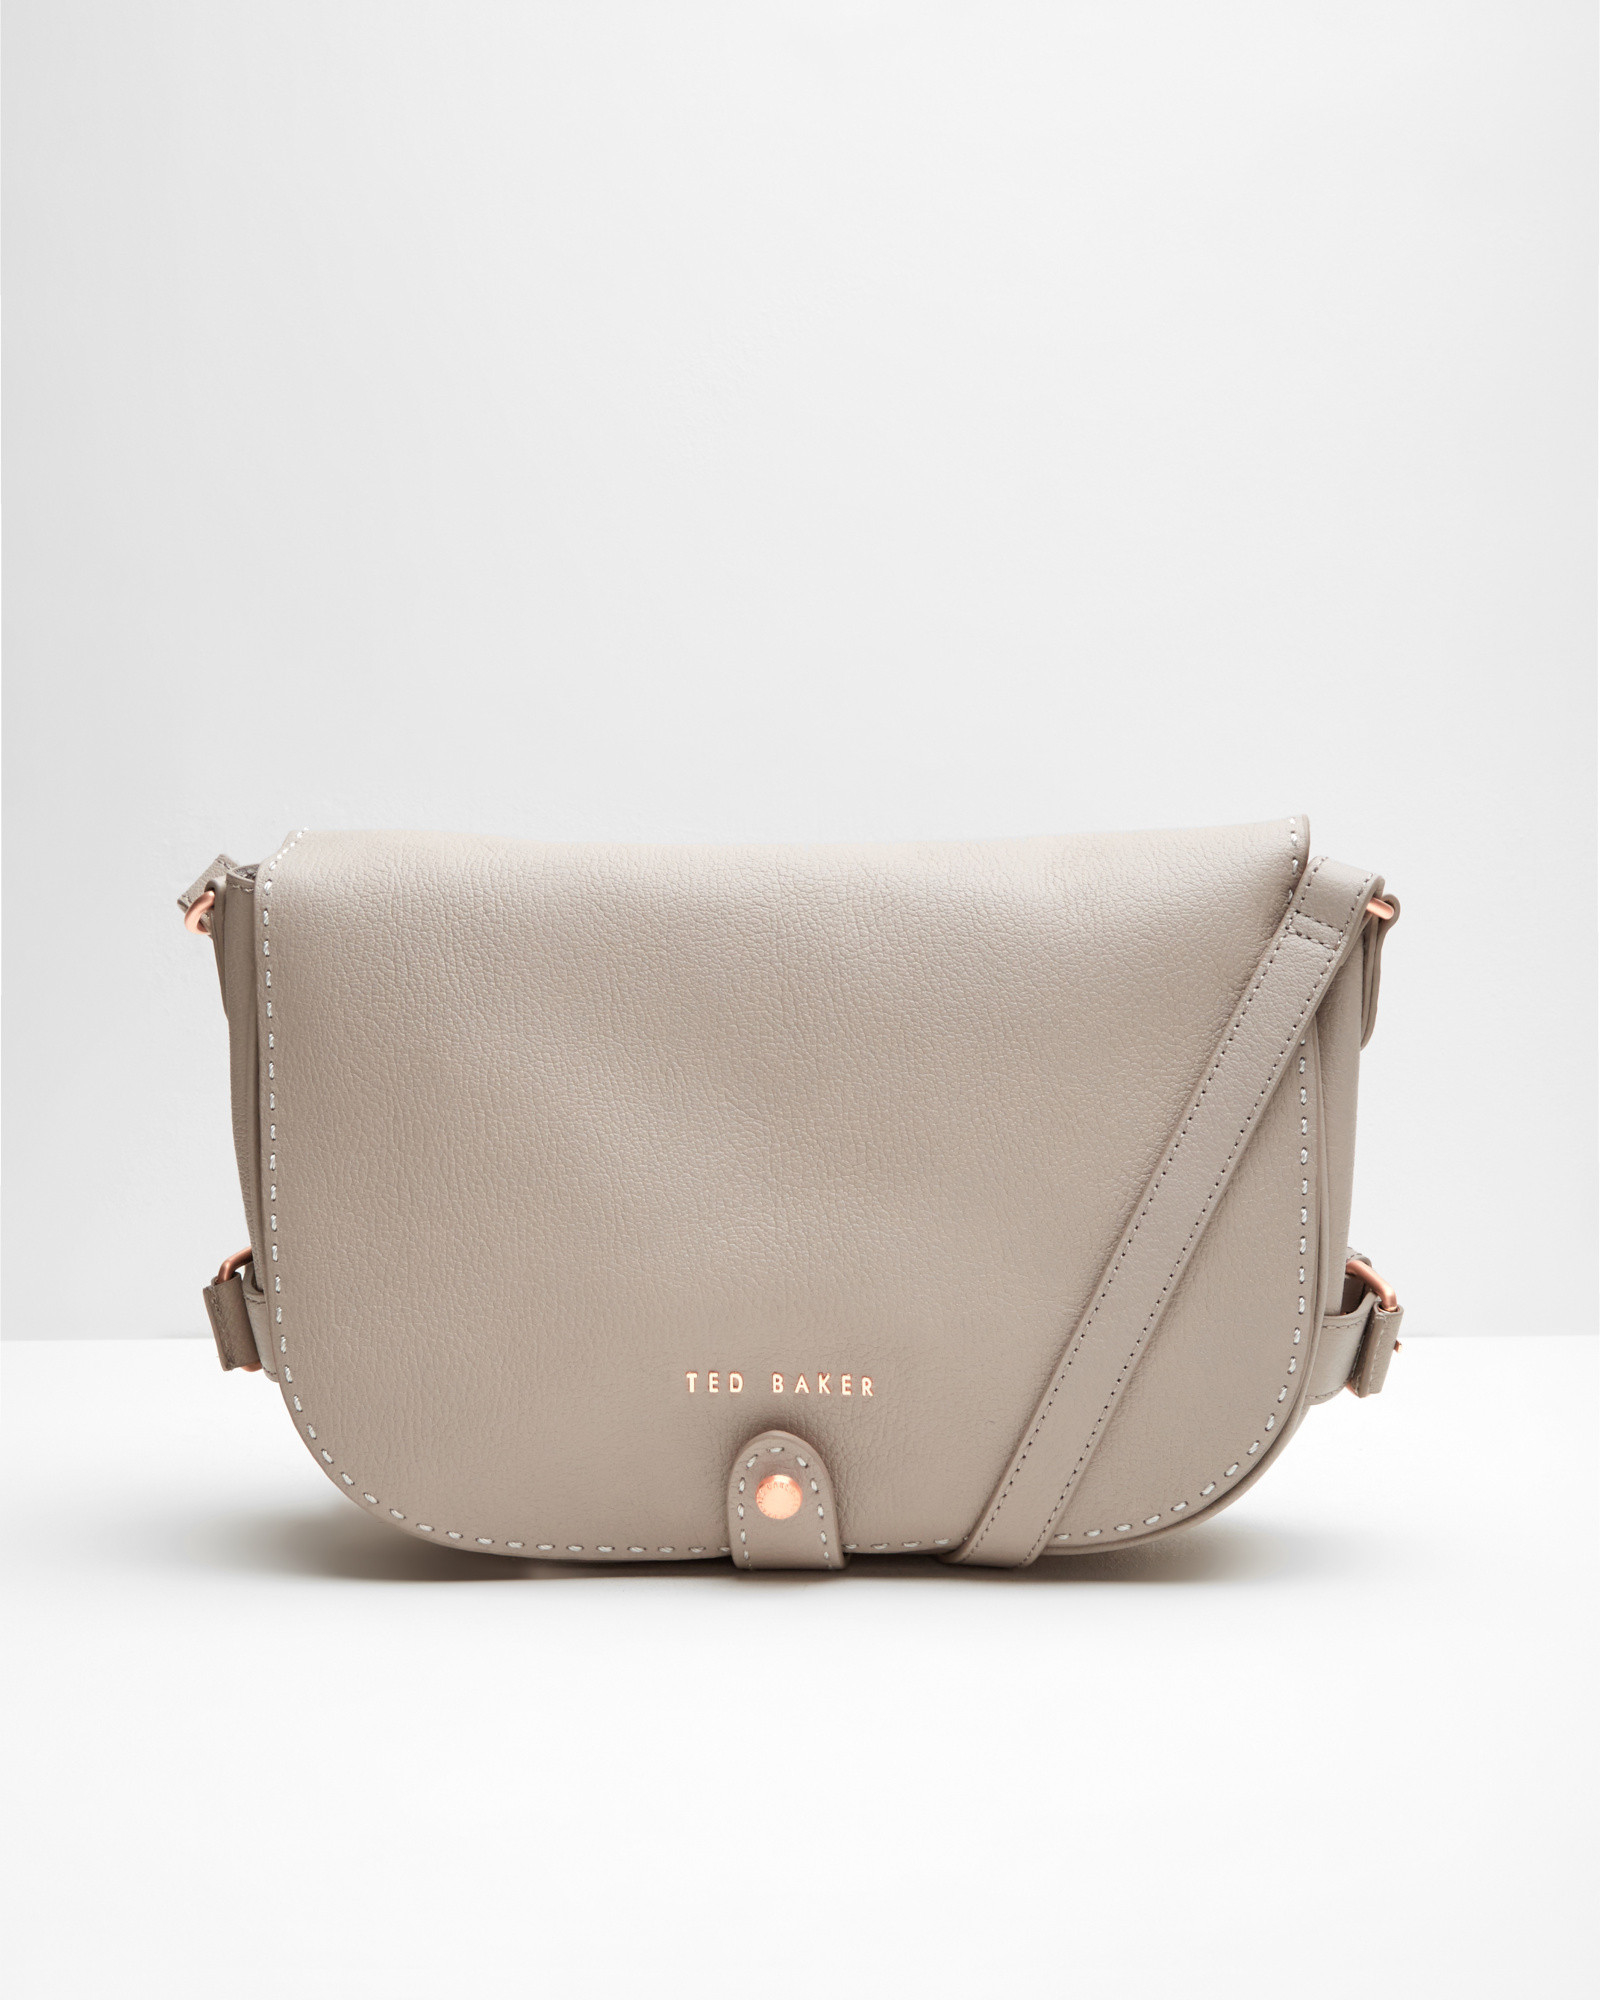 Lyst - Ted Baker Leather Crossbody Saddle Bag in Natural